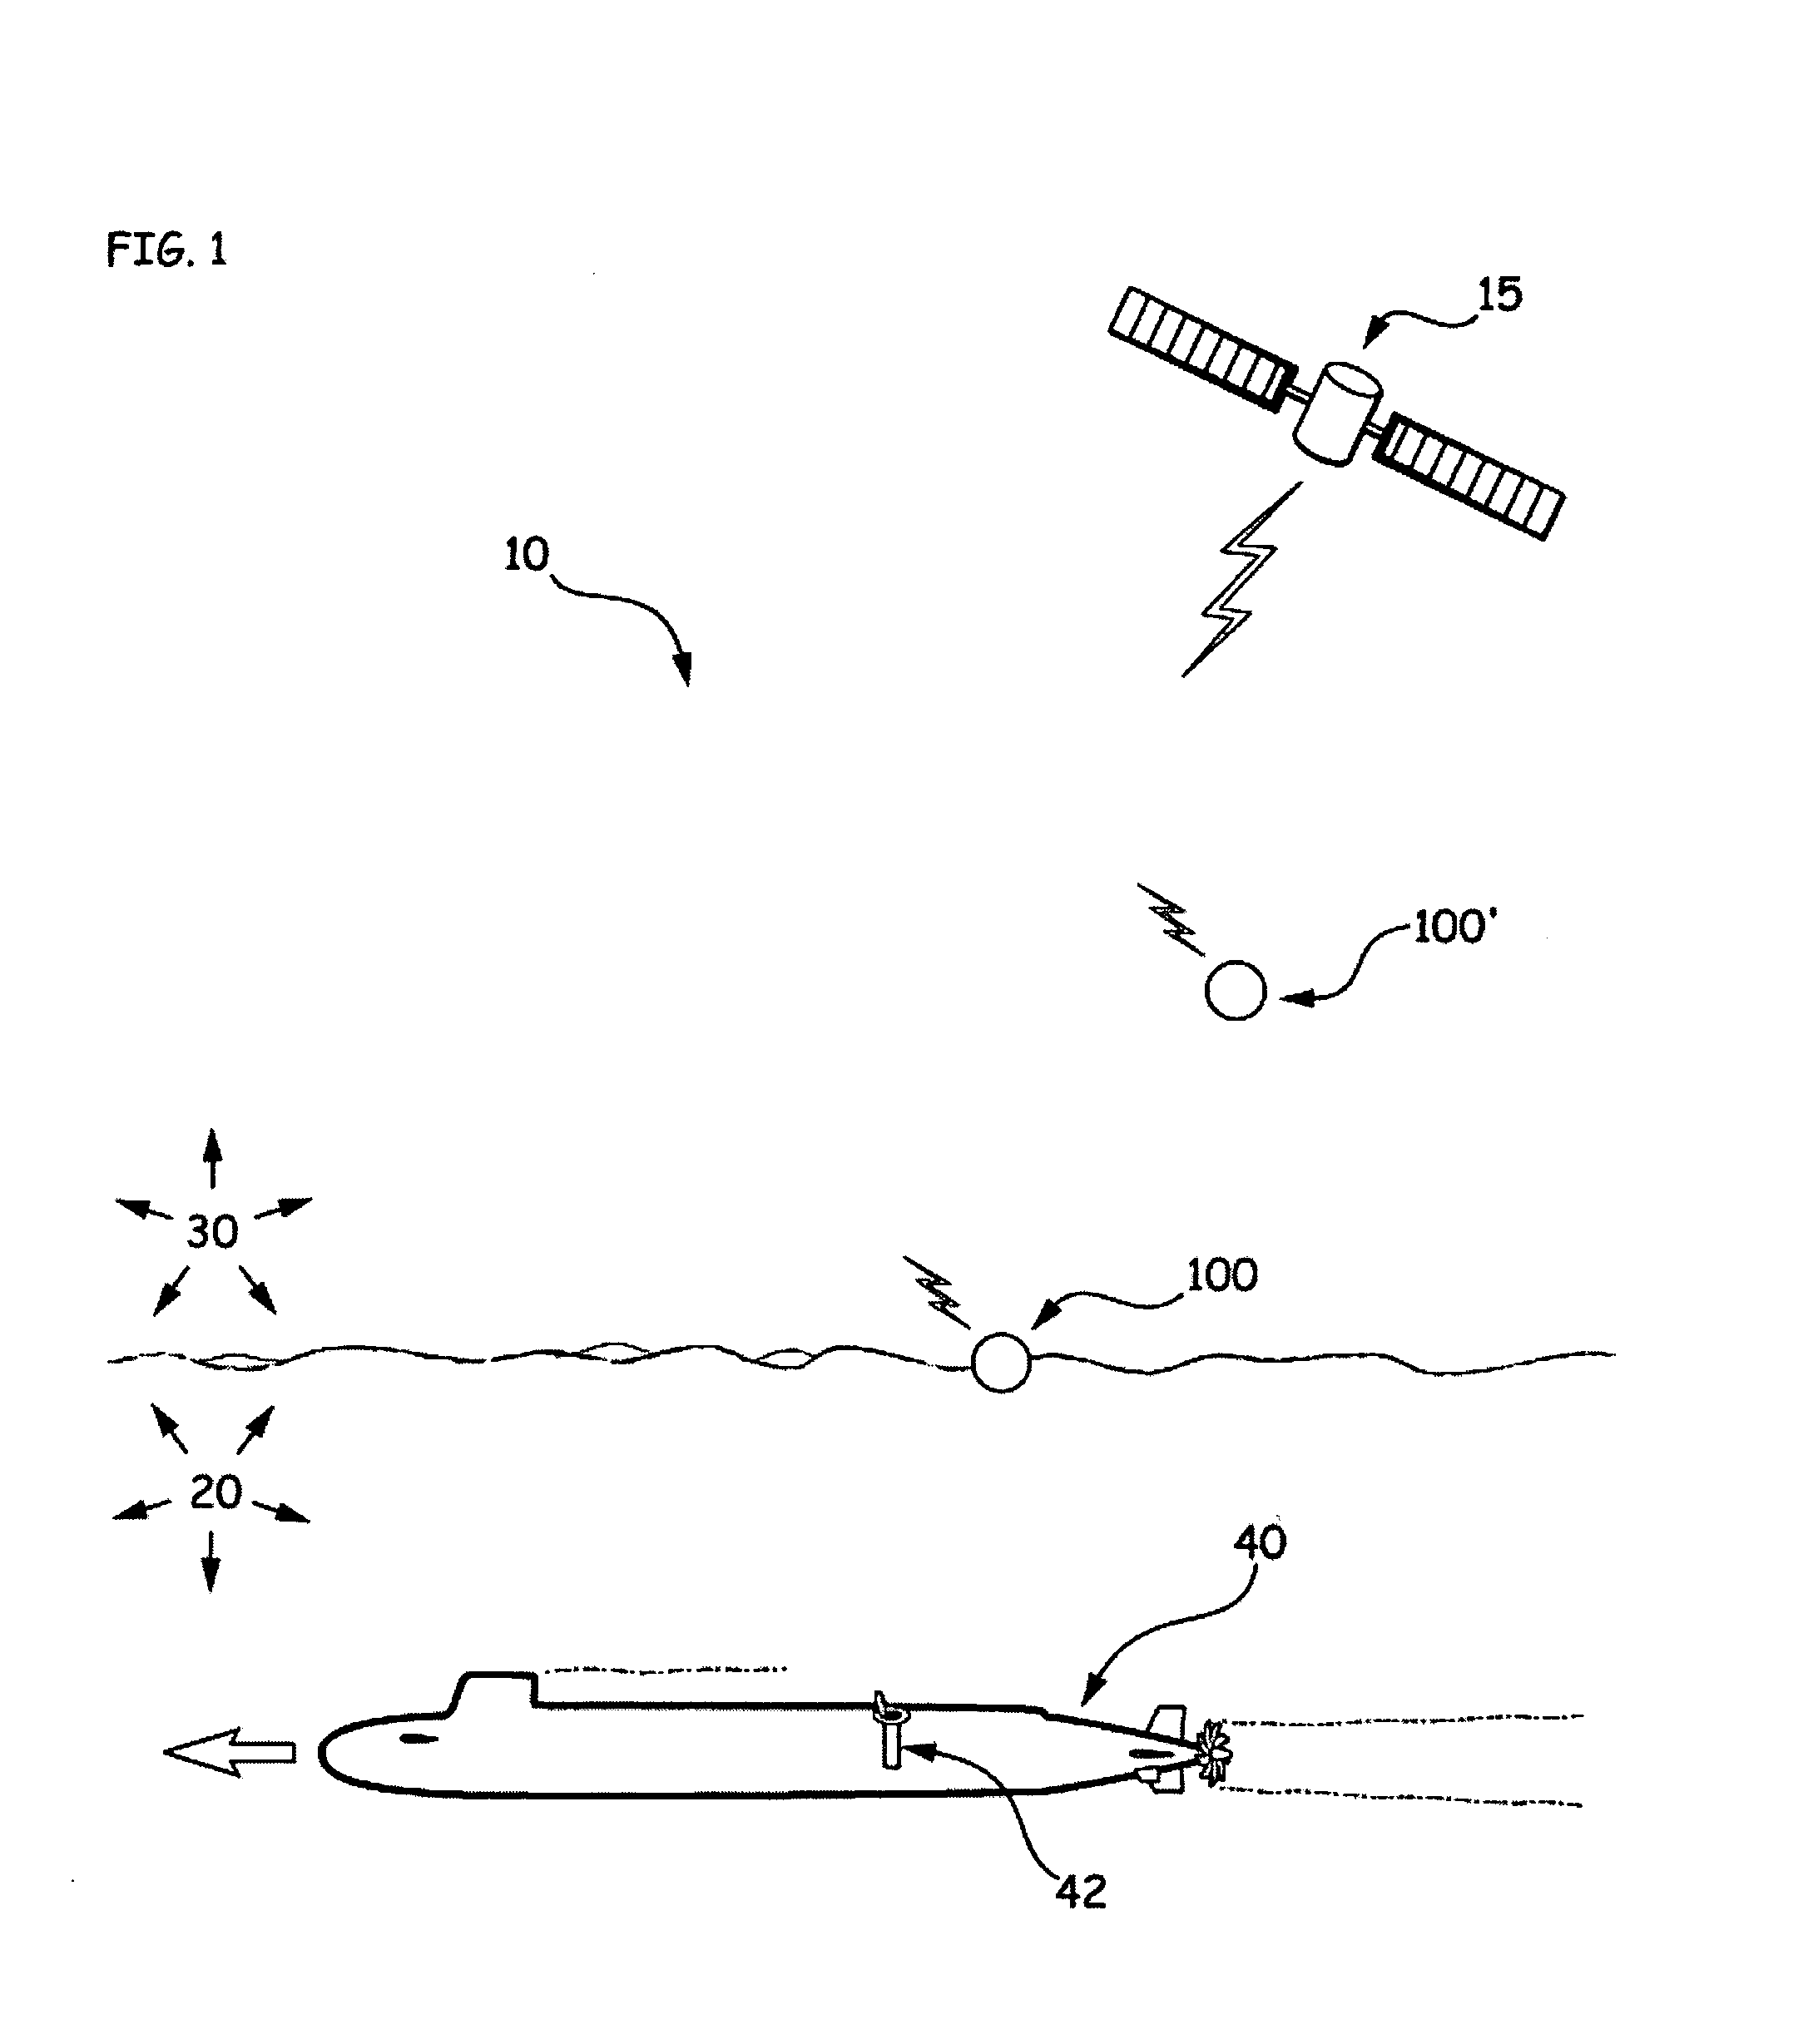 Water submersible communications devices and methods for using the same